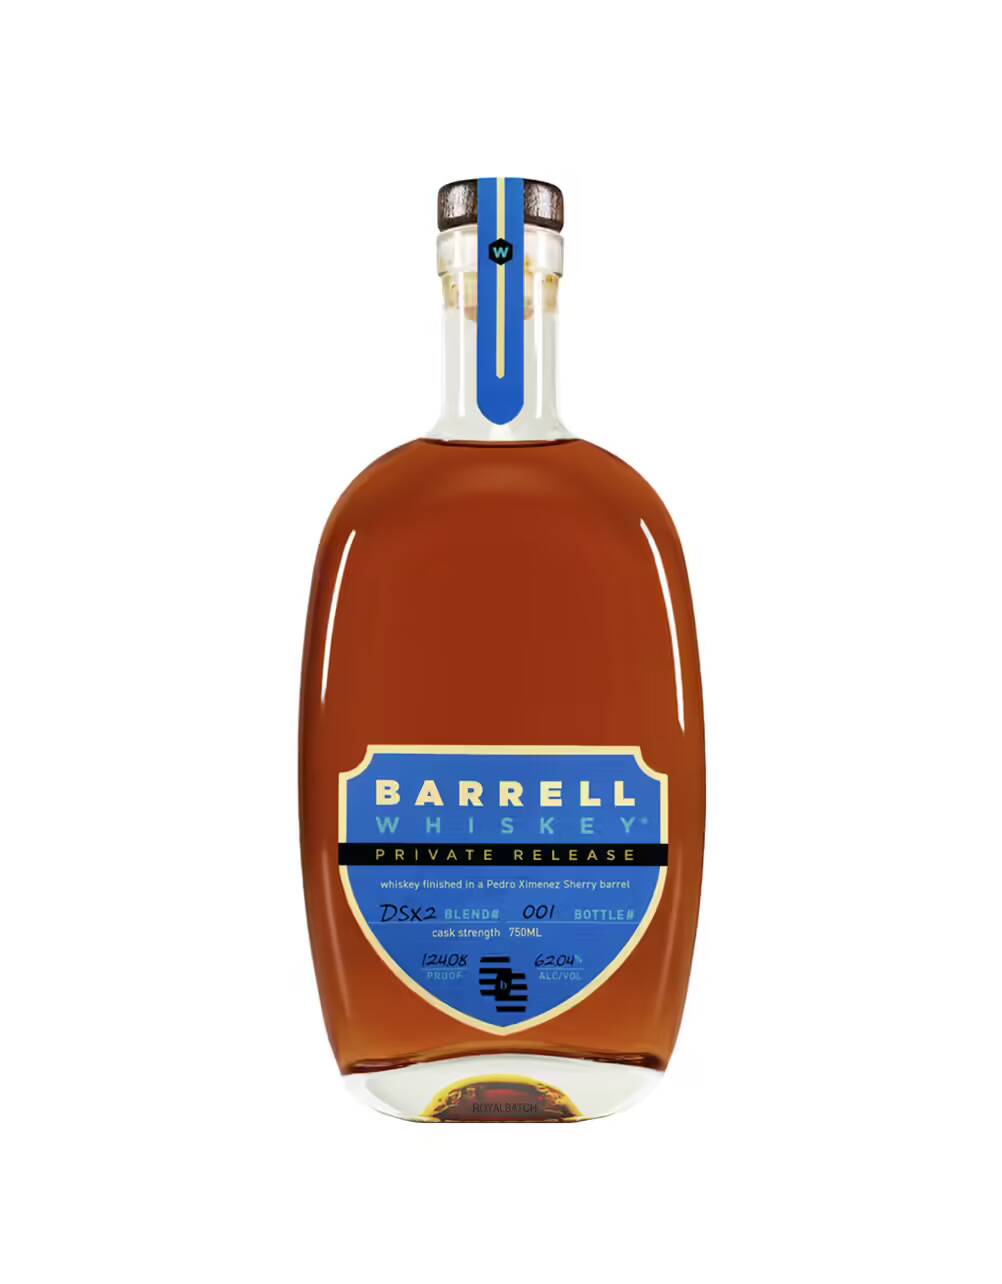 Barrell Whiskey Private Release Blend DSX2 Proof 124.08 Cask Strength